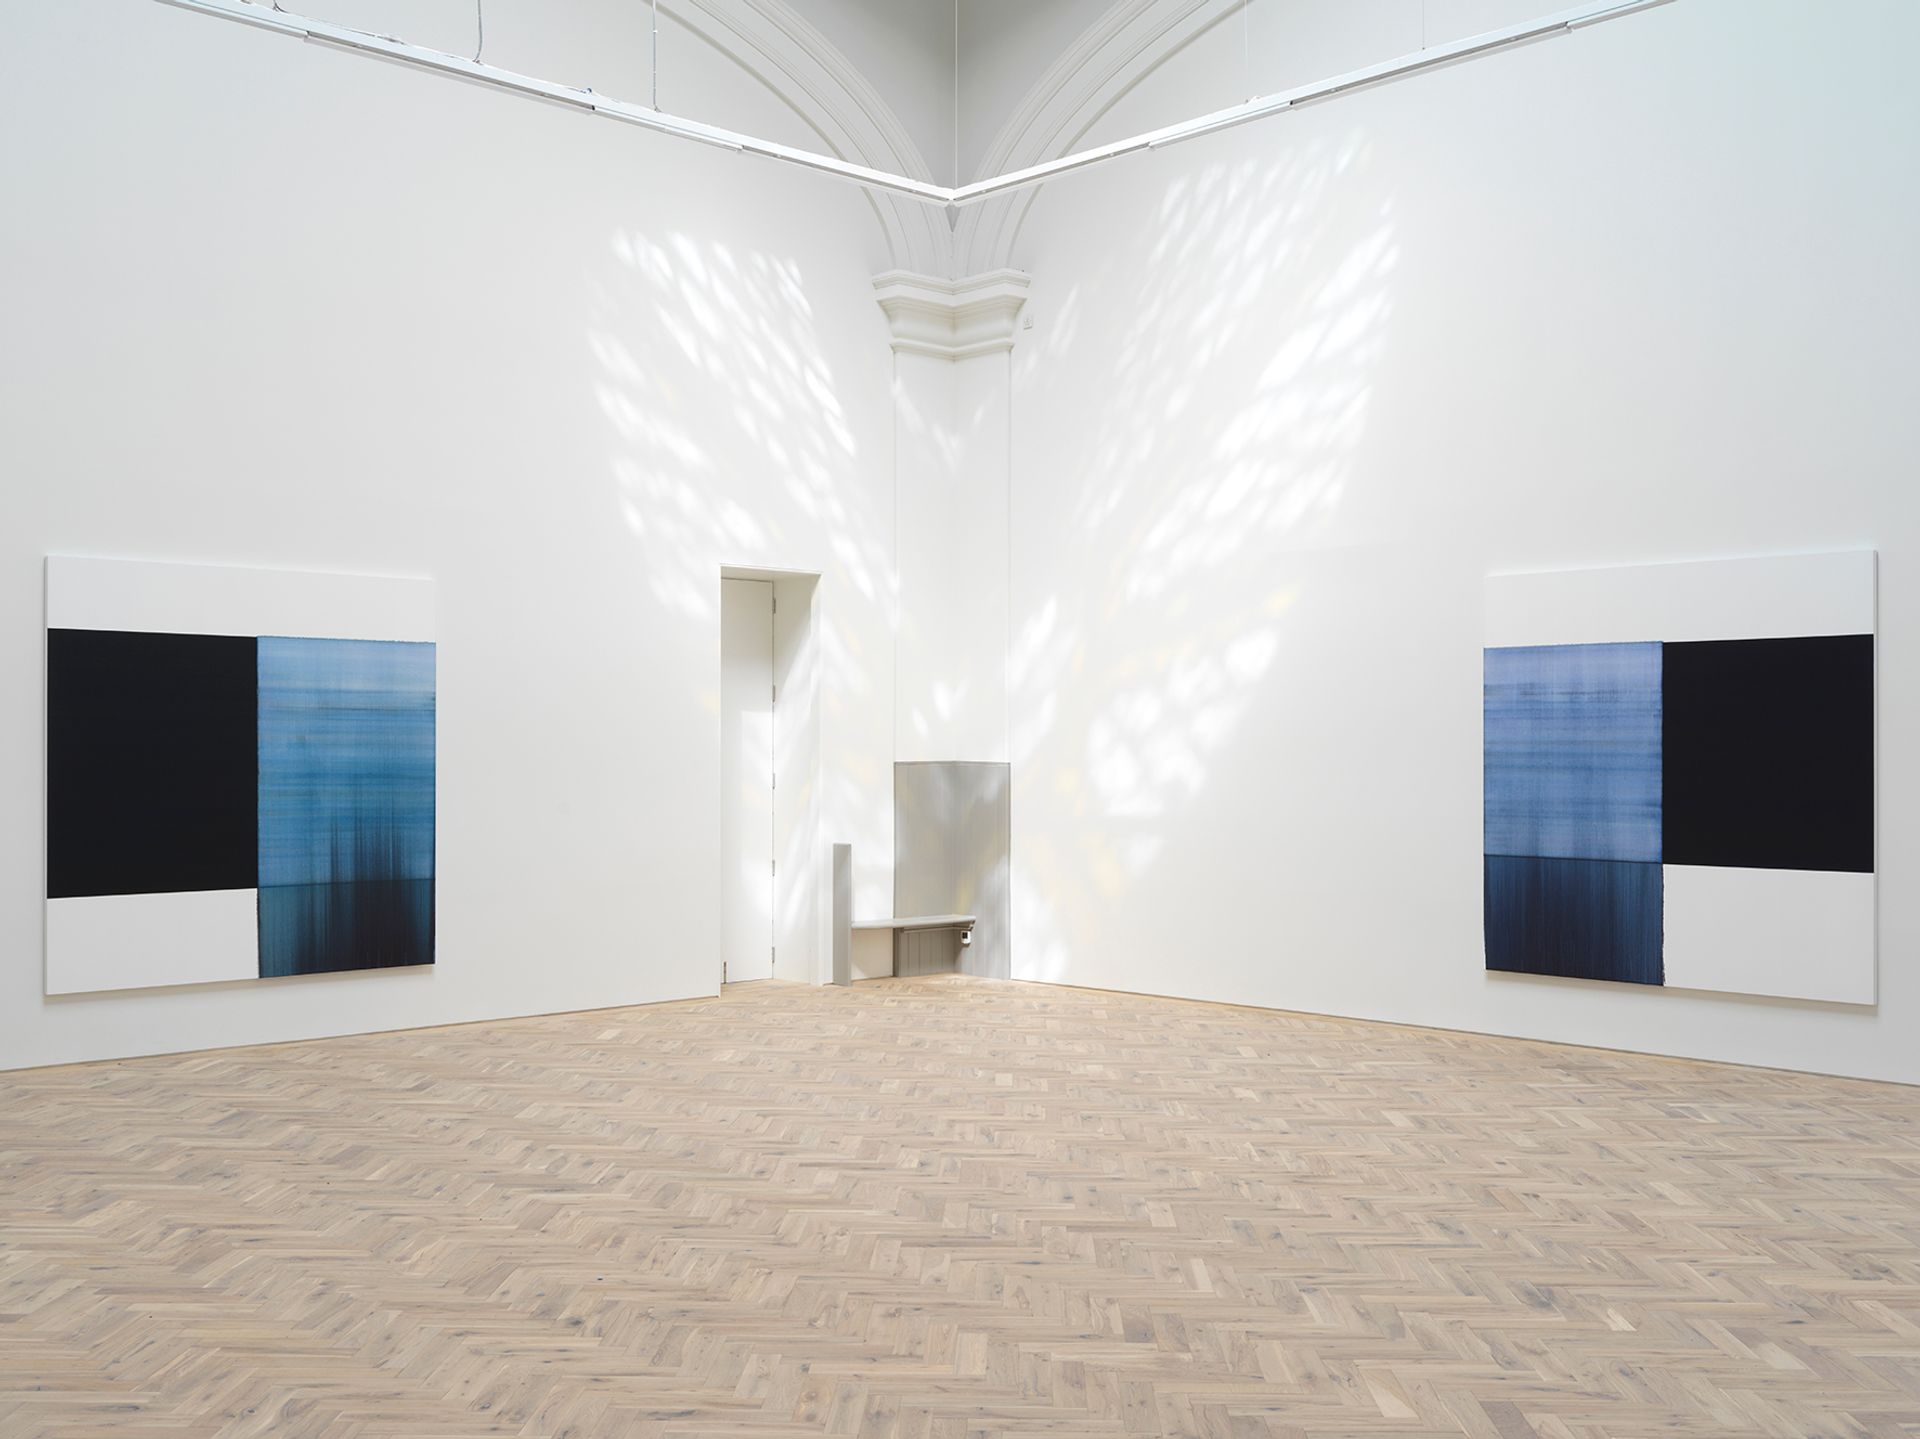 On the left, Callum Innes's Delft Blue (2018) and Oriental Blue (2018) on the right Photo: Tom Nolan. Courtesy of Callum Innes and Ingleby Gallery